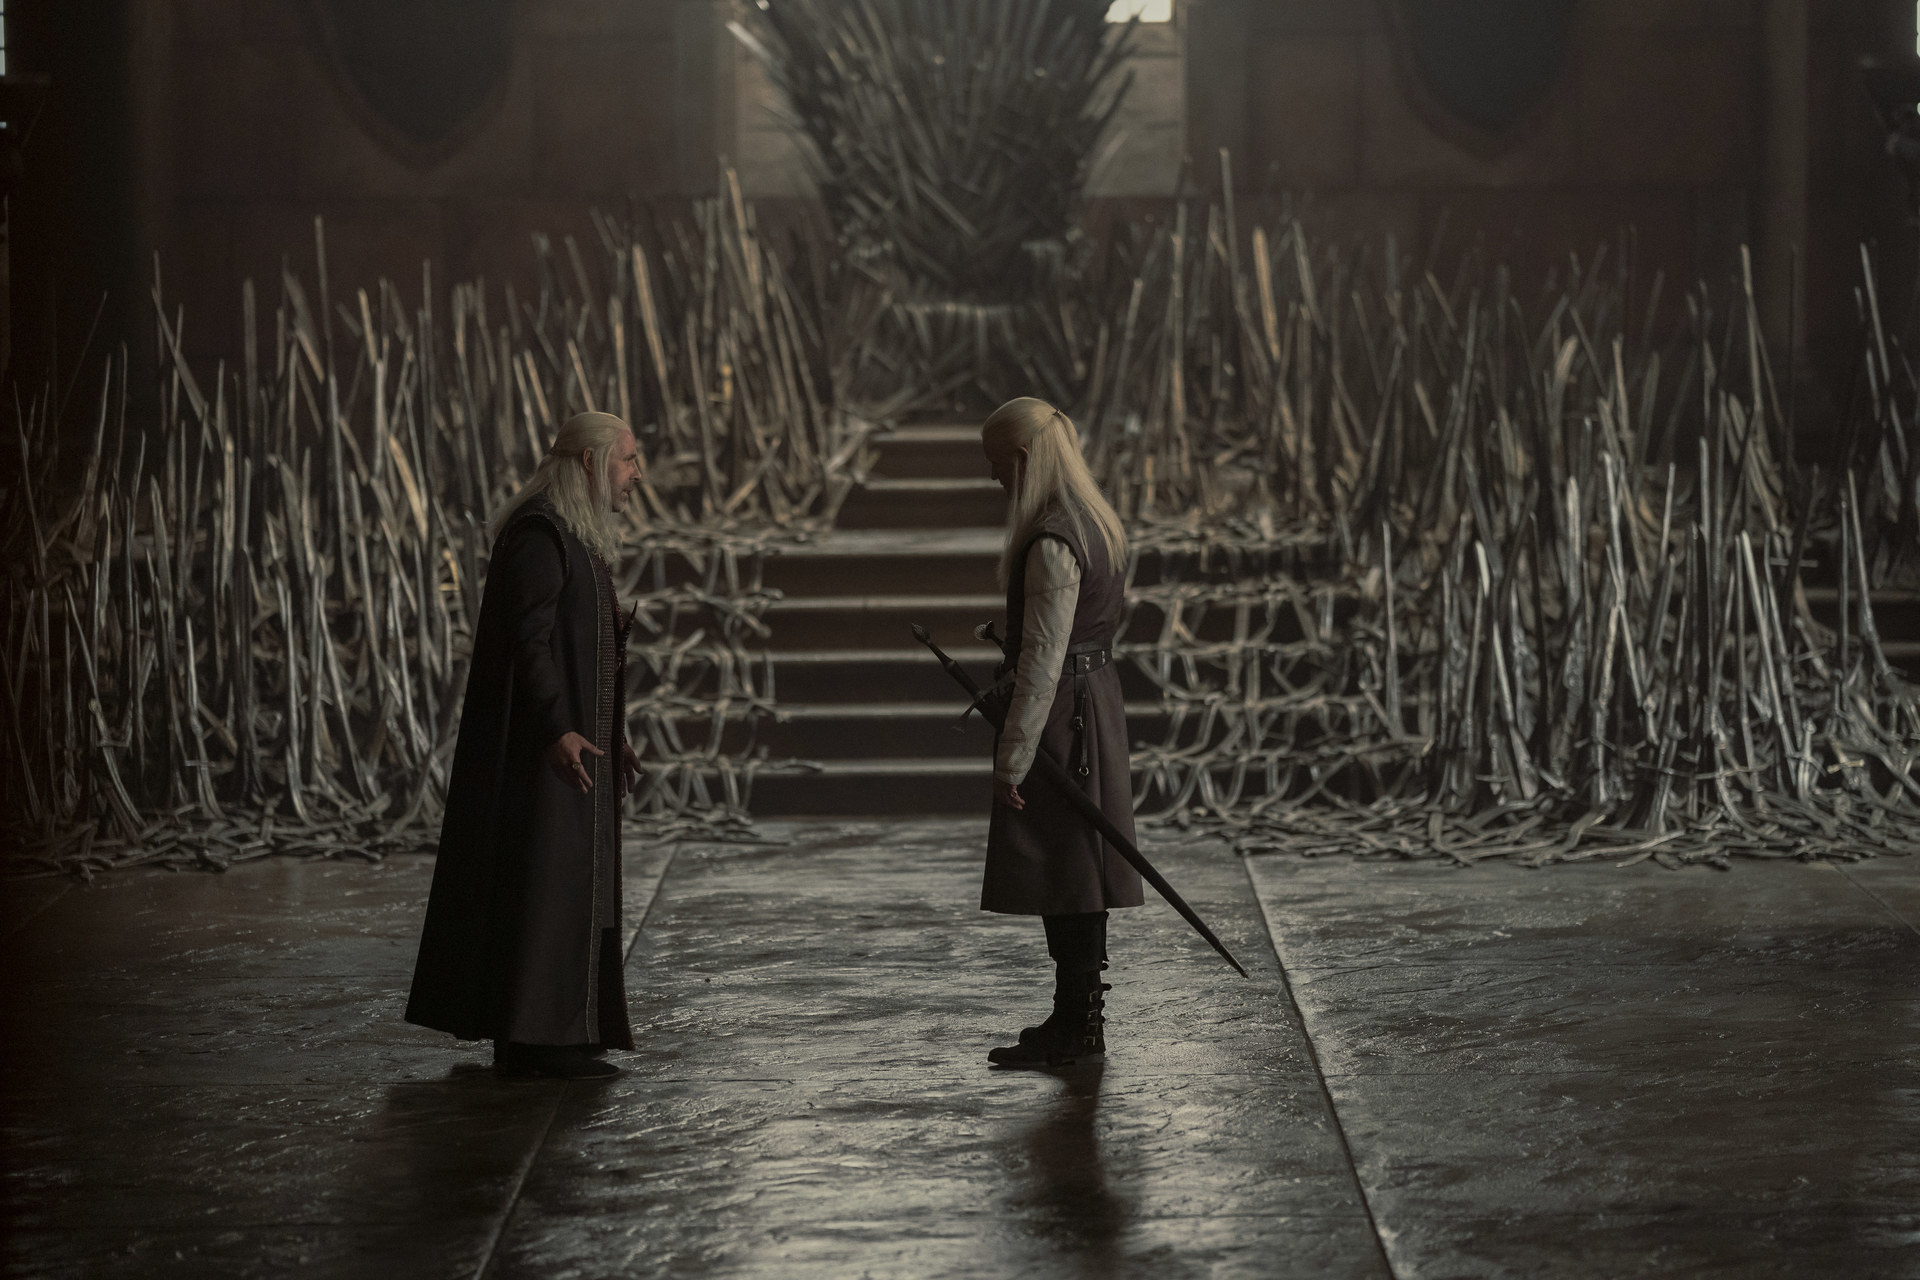 Viserys and Daemon stand in front of the Iron Throne